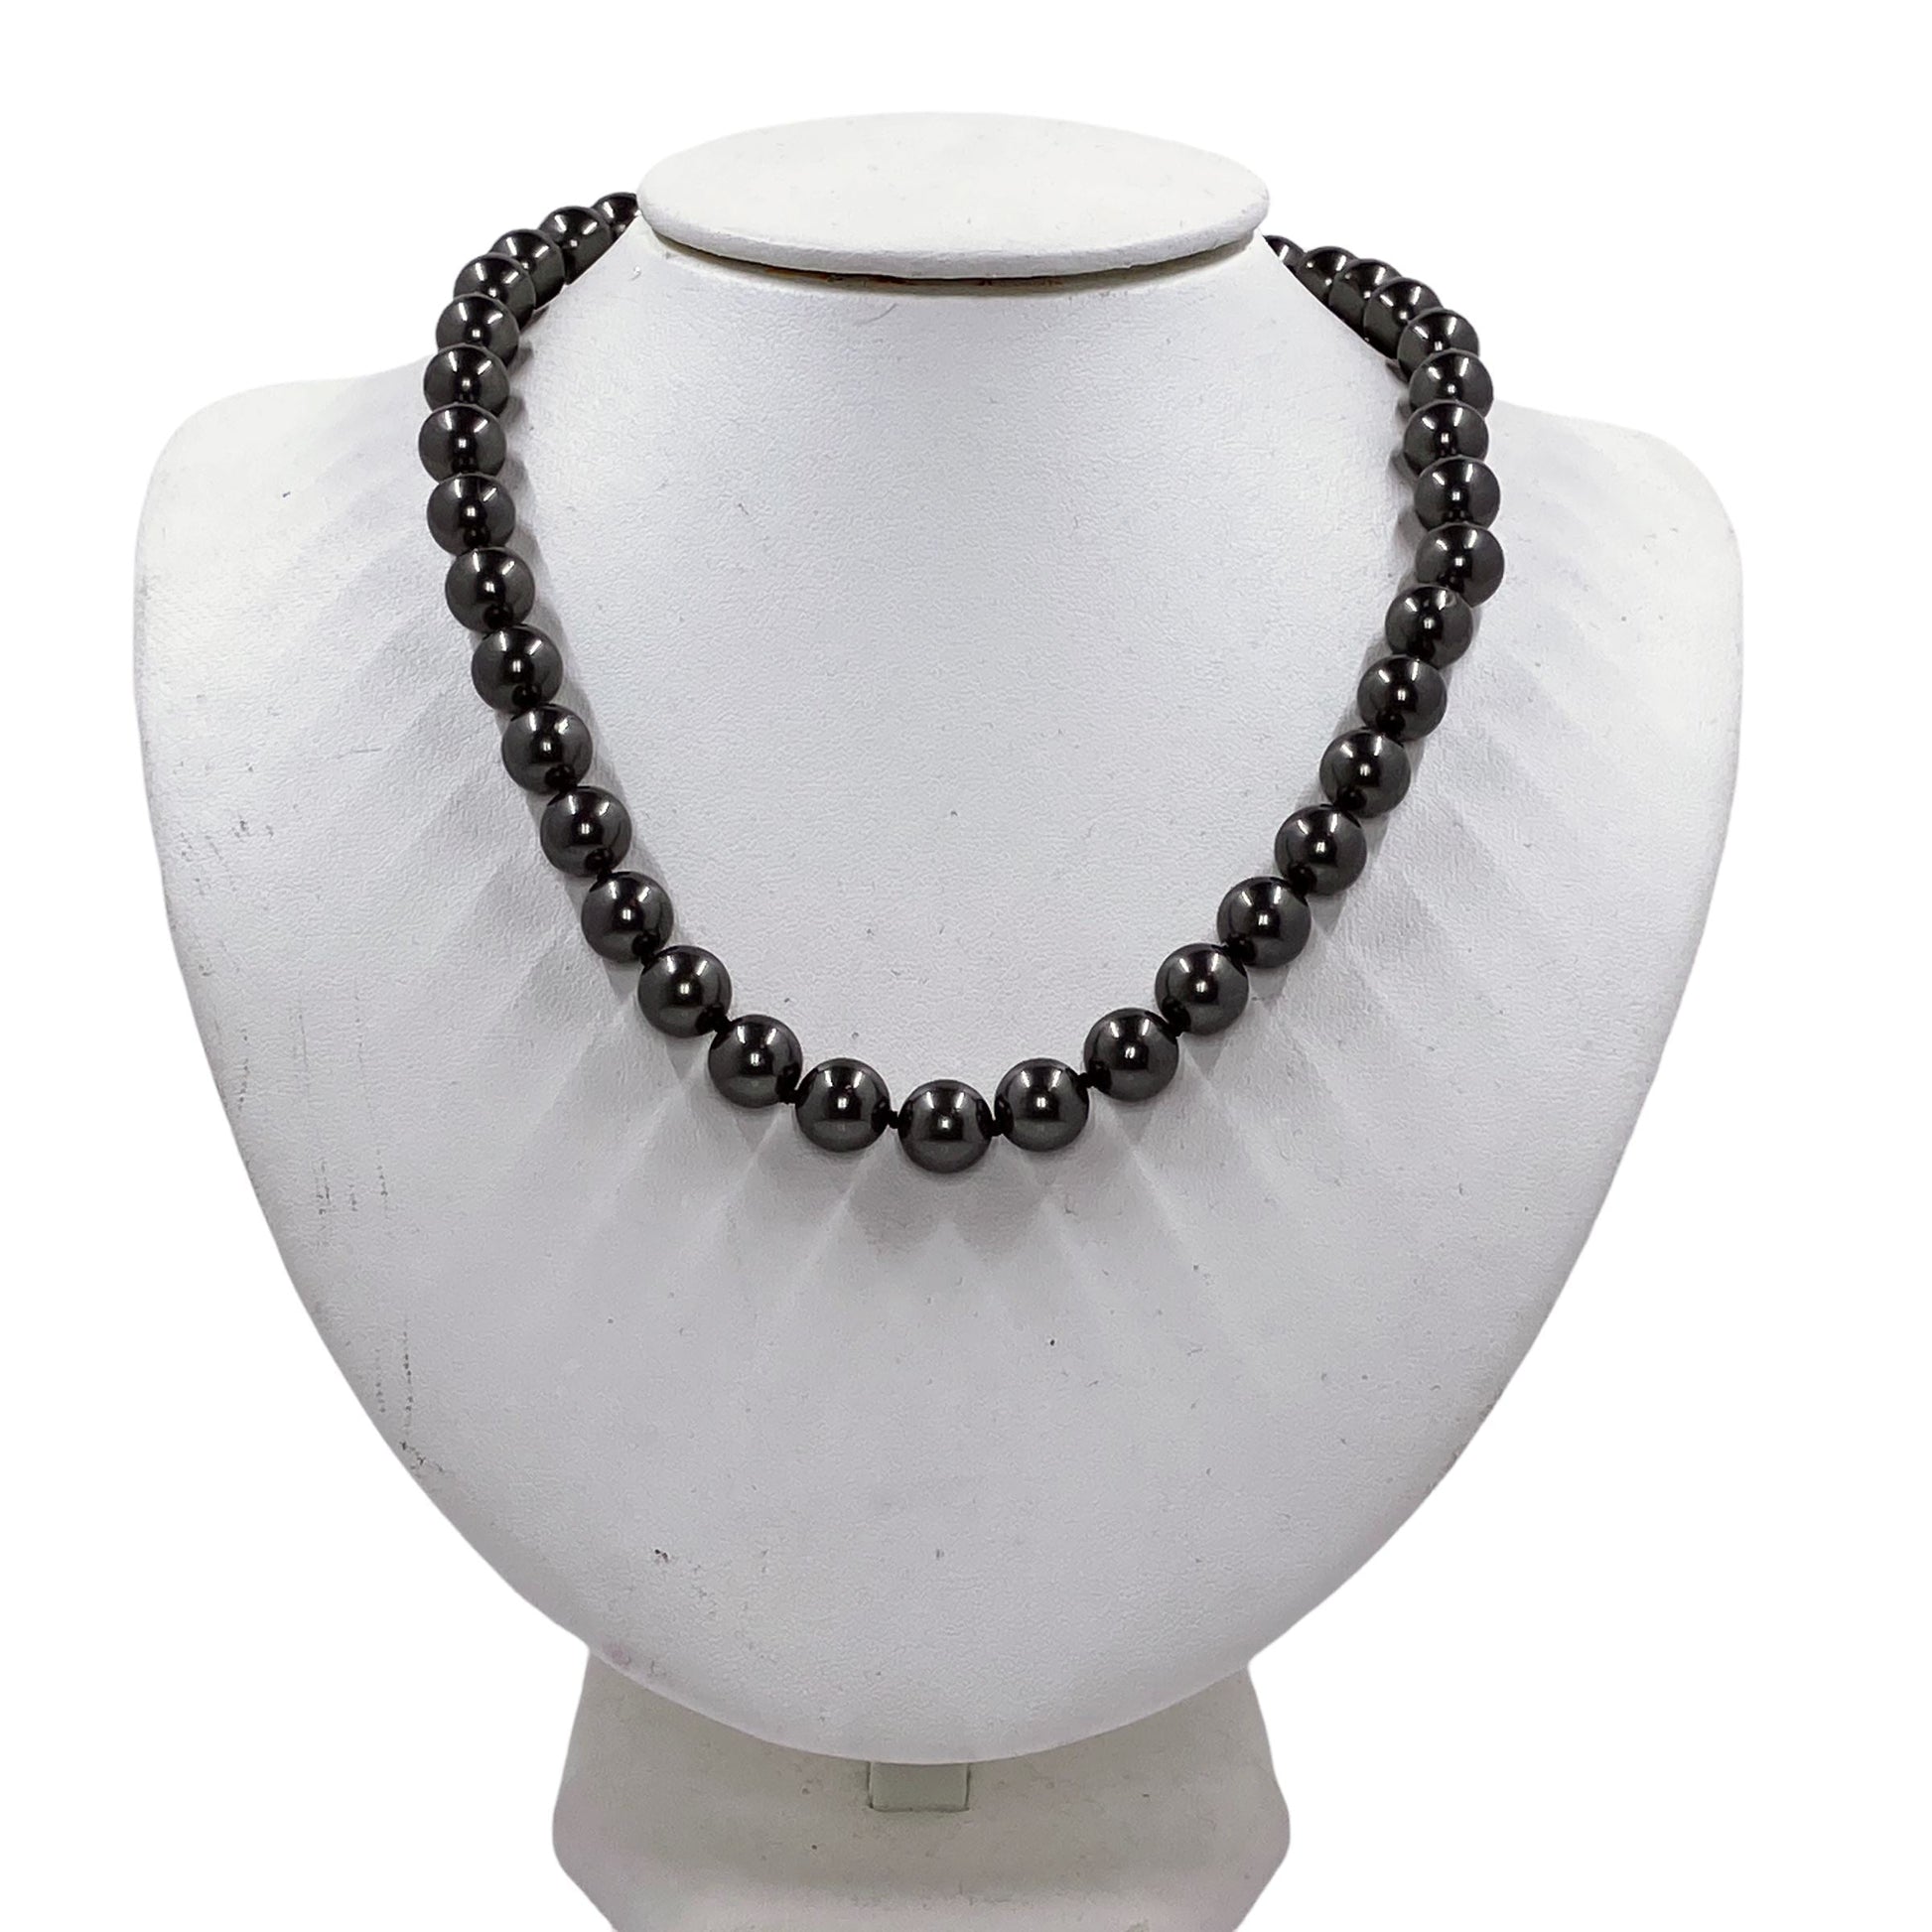 Madam VP Black Pearl Necklace and Earrings Necklaces TRENDZIO 